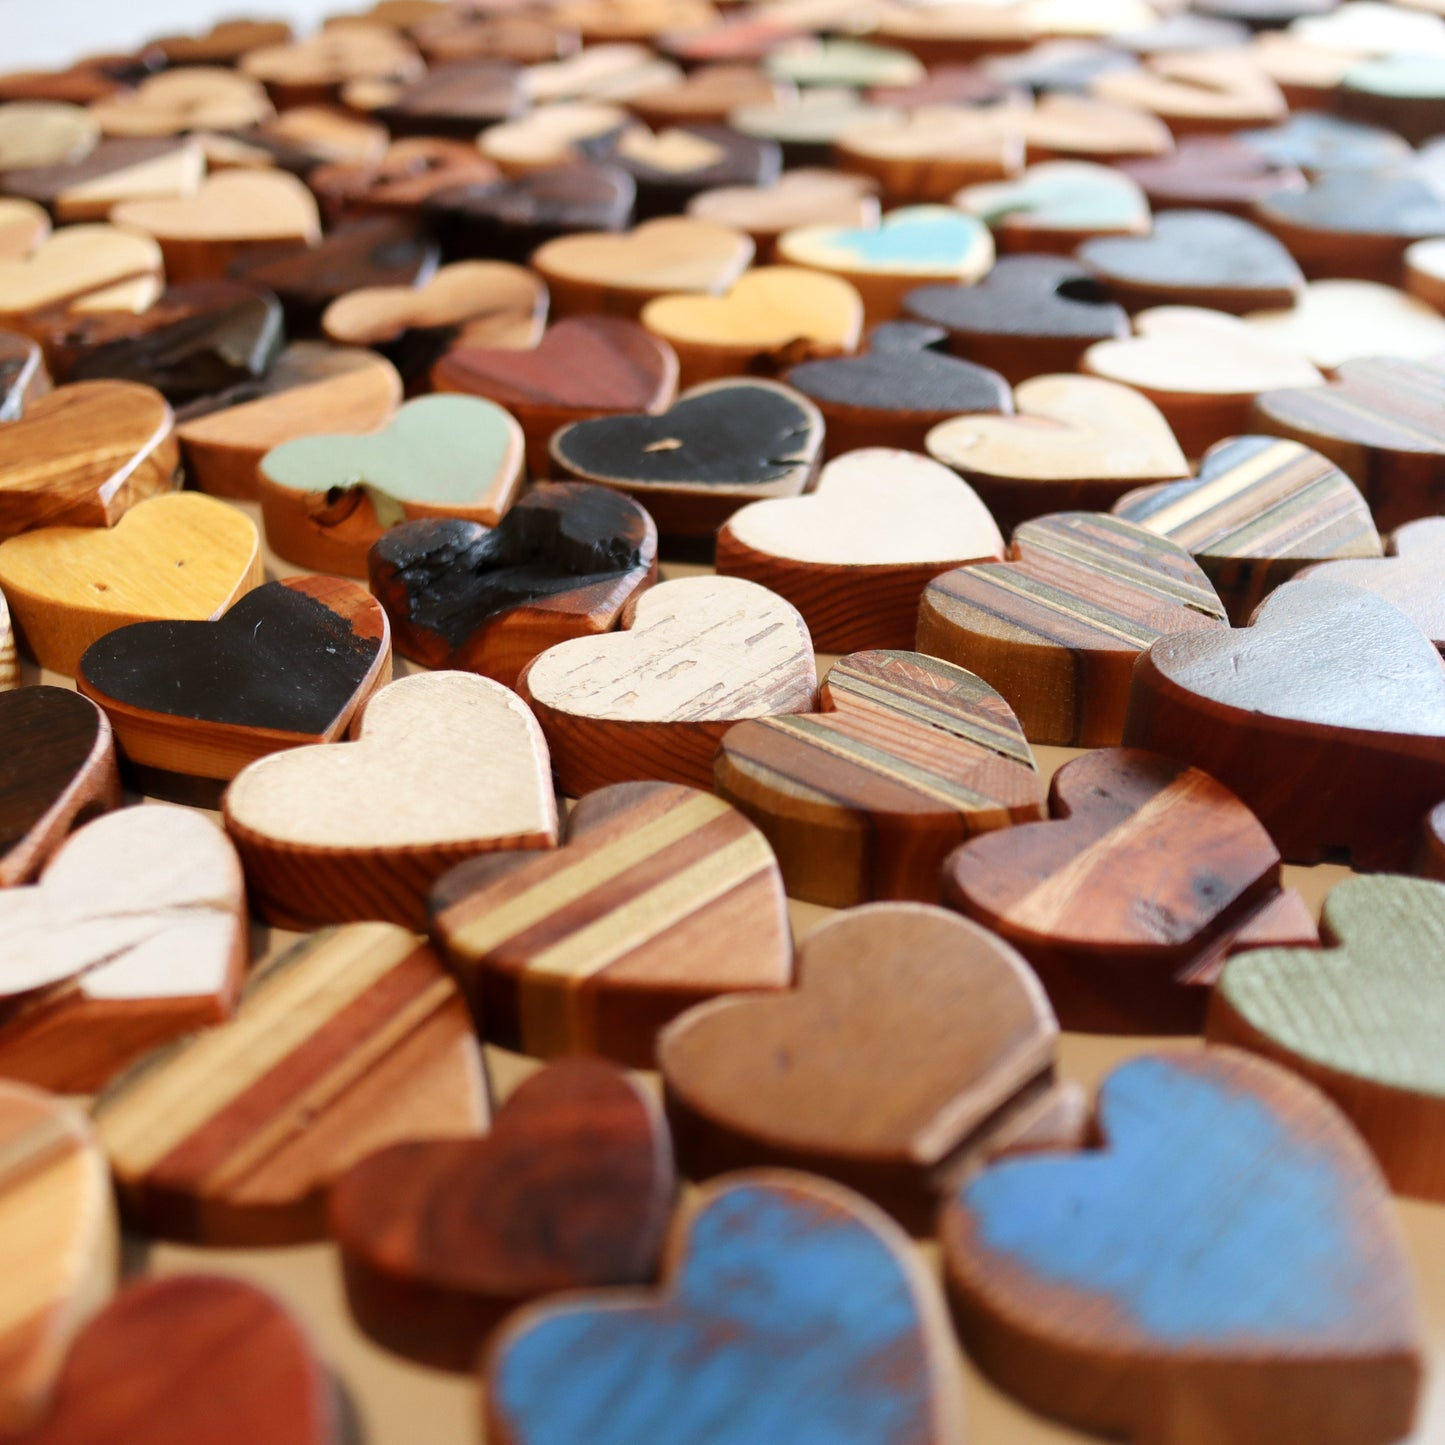 Imperfect Wooden Hearts – Dennehey Design Co.